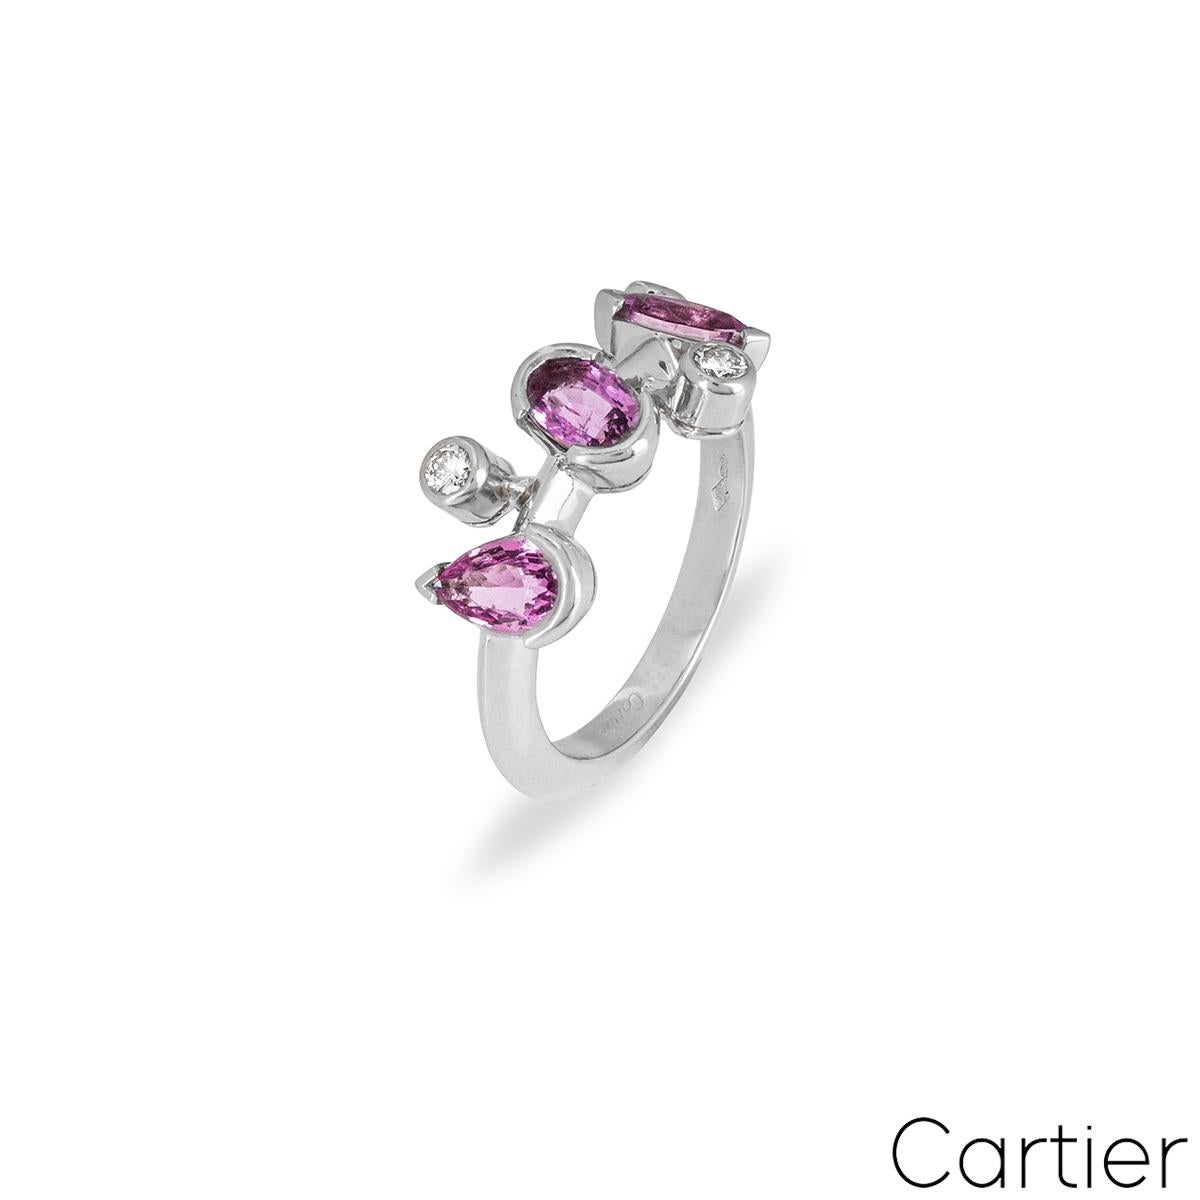 A pretty pink sapphire and diamond ring in platinum from the Cartier Meli Melo collection. The ring has a selection of marquise, oval and pear cut pink sapphires totalling approximately 1.30ct and 3 round brilliant cut diamonds totalling